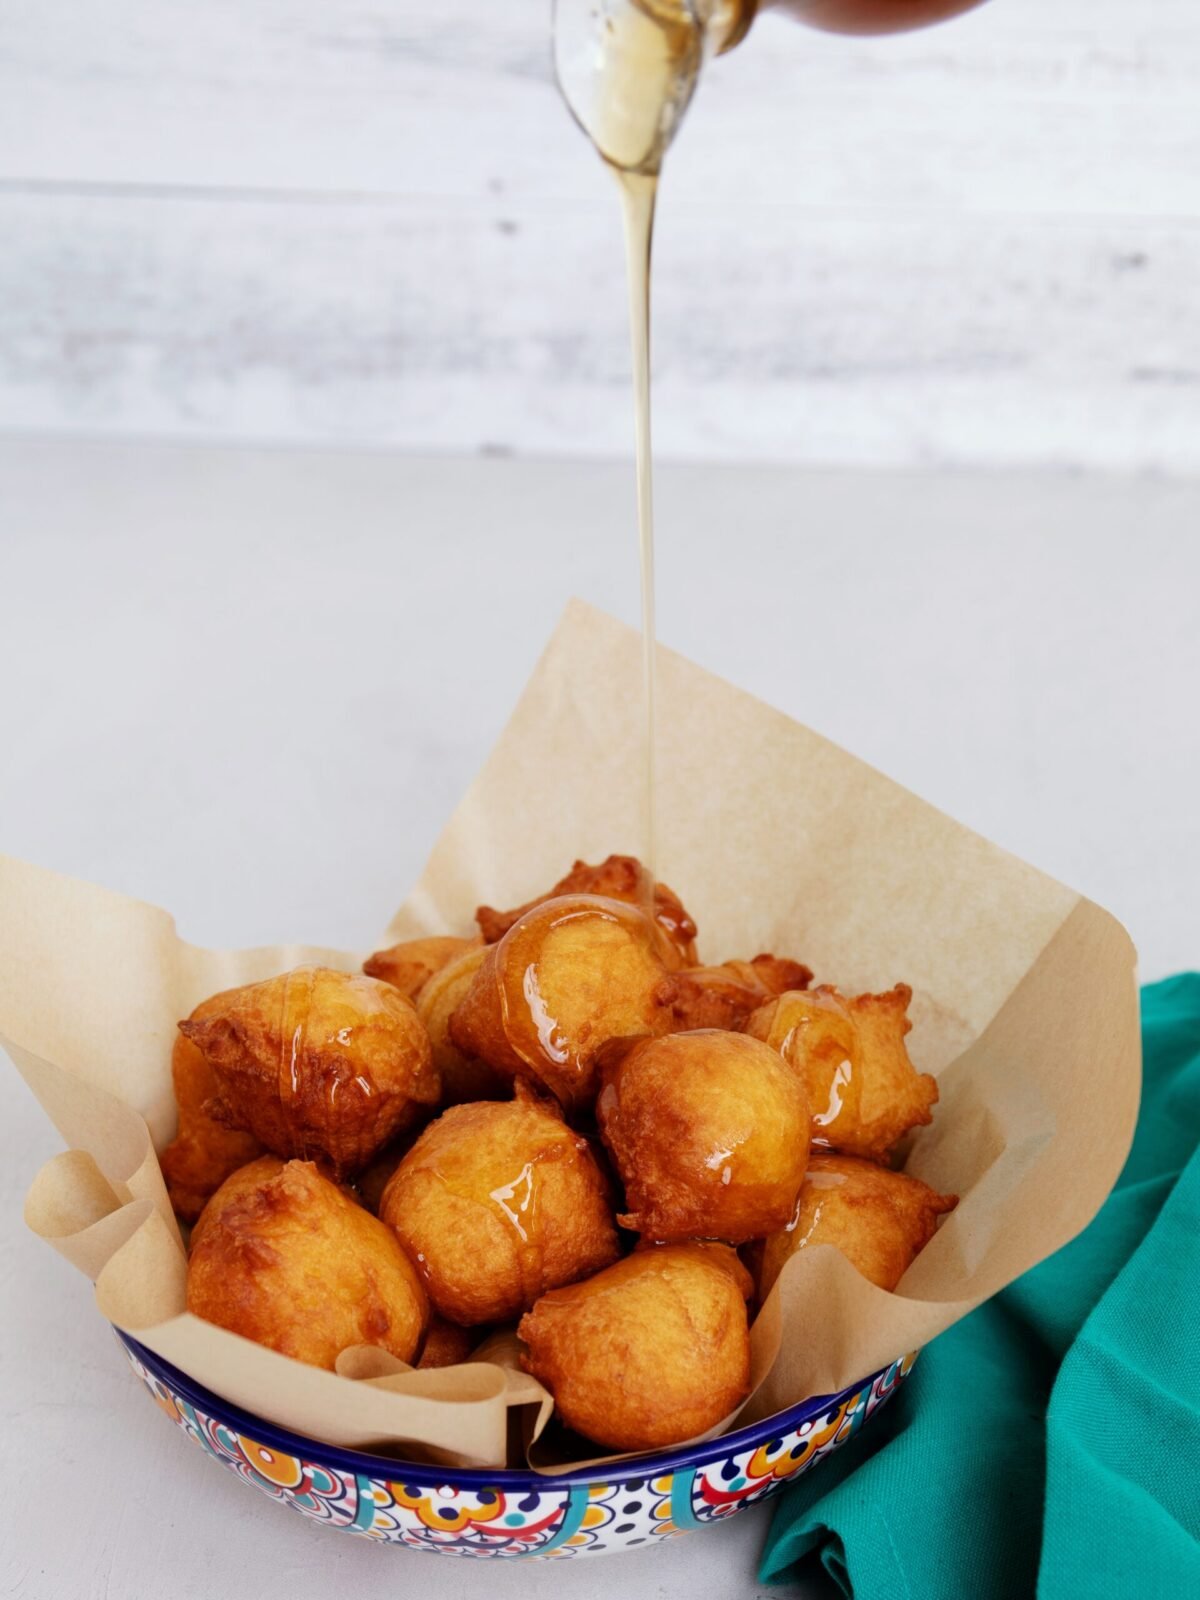 Malasadas featured in a bowl and pouring syrup